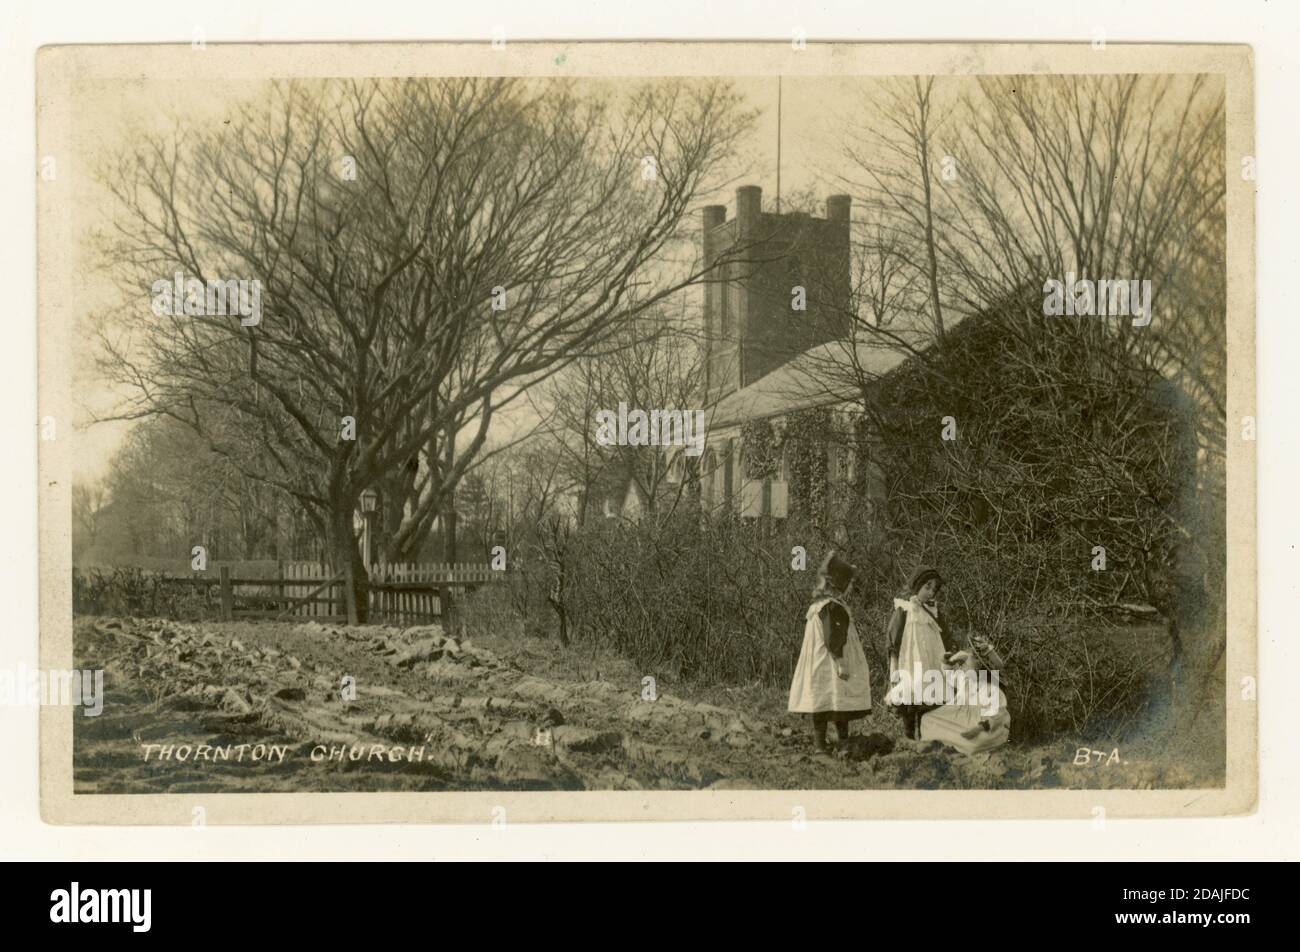 Original early 1900's postcard of three young girls outside Christ Church, (Thornton Church), Thornton-Cleveleys (near Blackpool), Lancashire, U.K. posted April 24 1905. This church was demolished in 1972 and a new one built in its place. Stock Photo